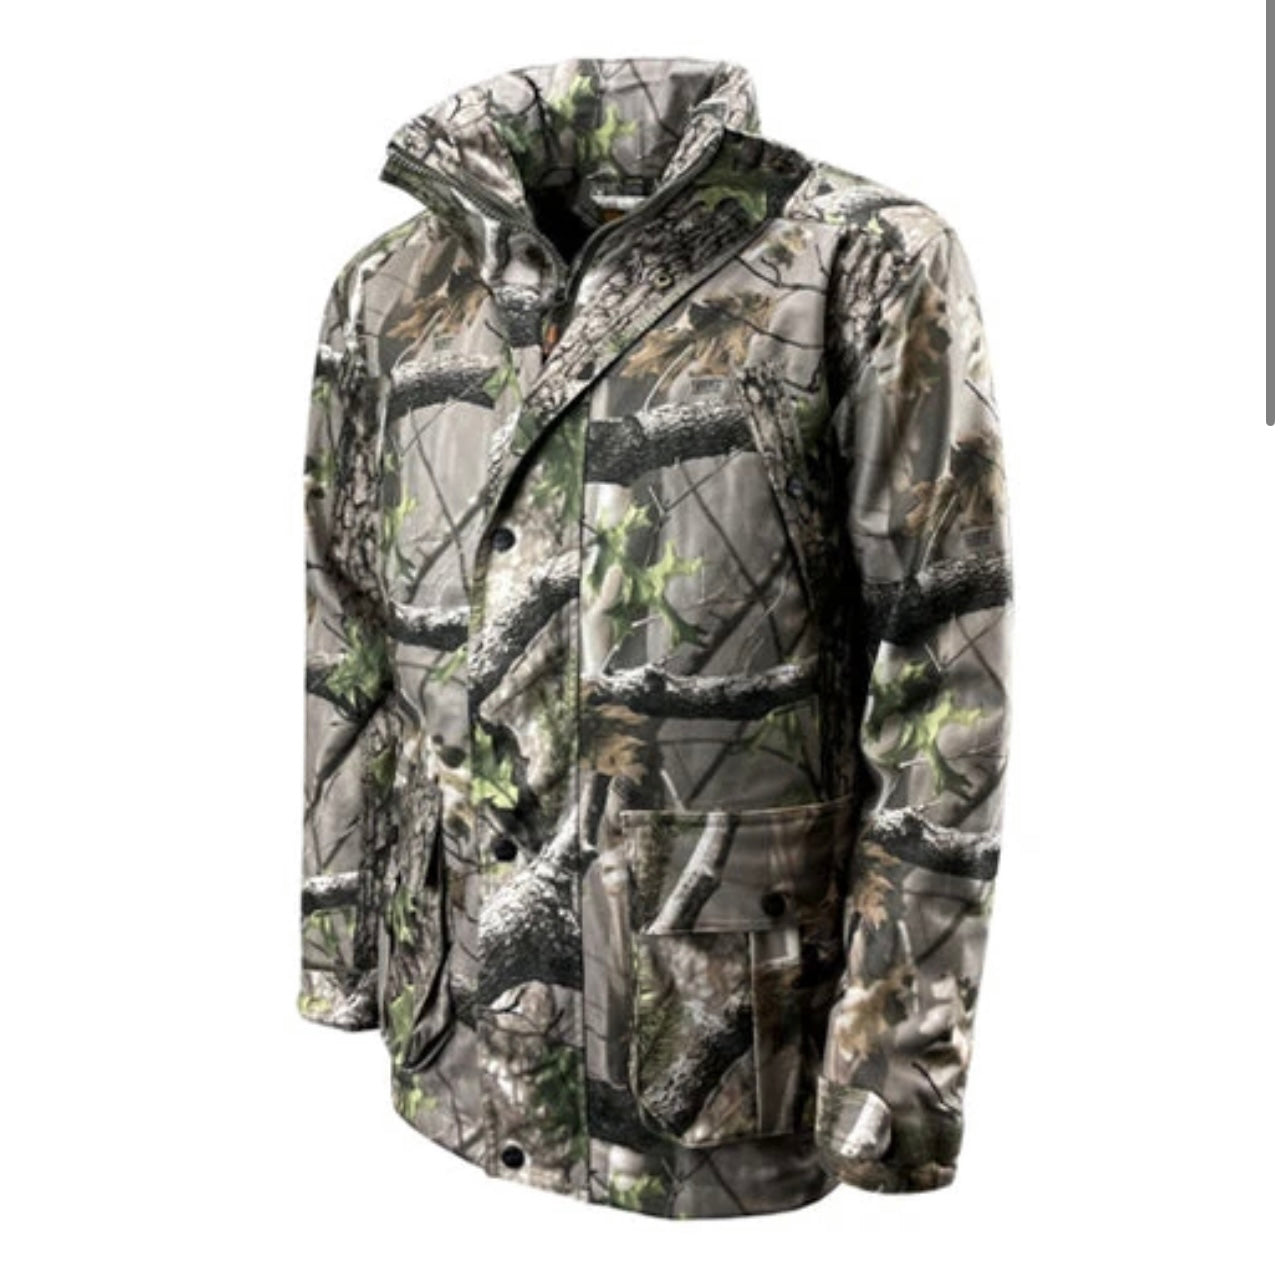 Game Stealth Jacket (Camo)